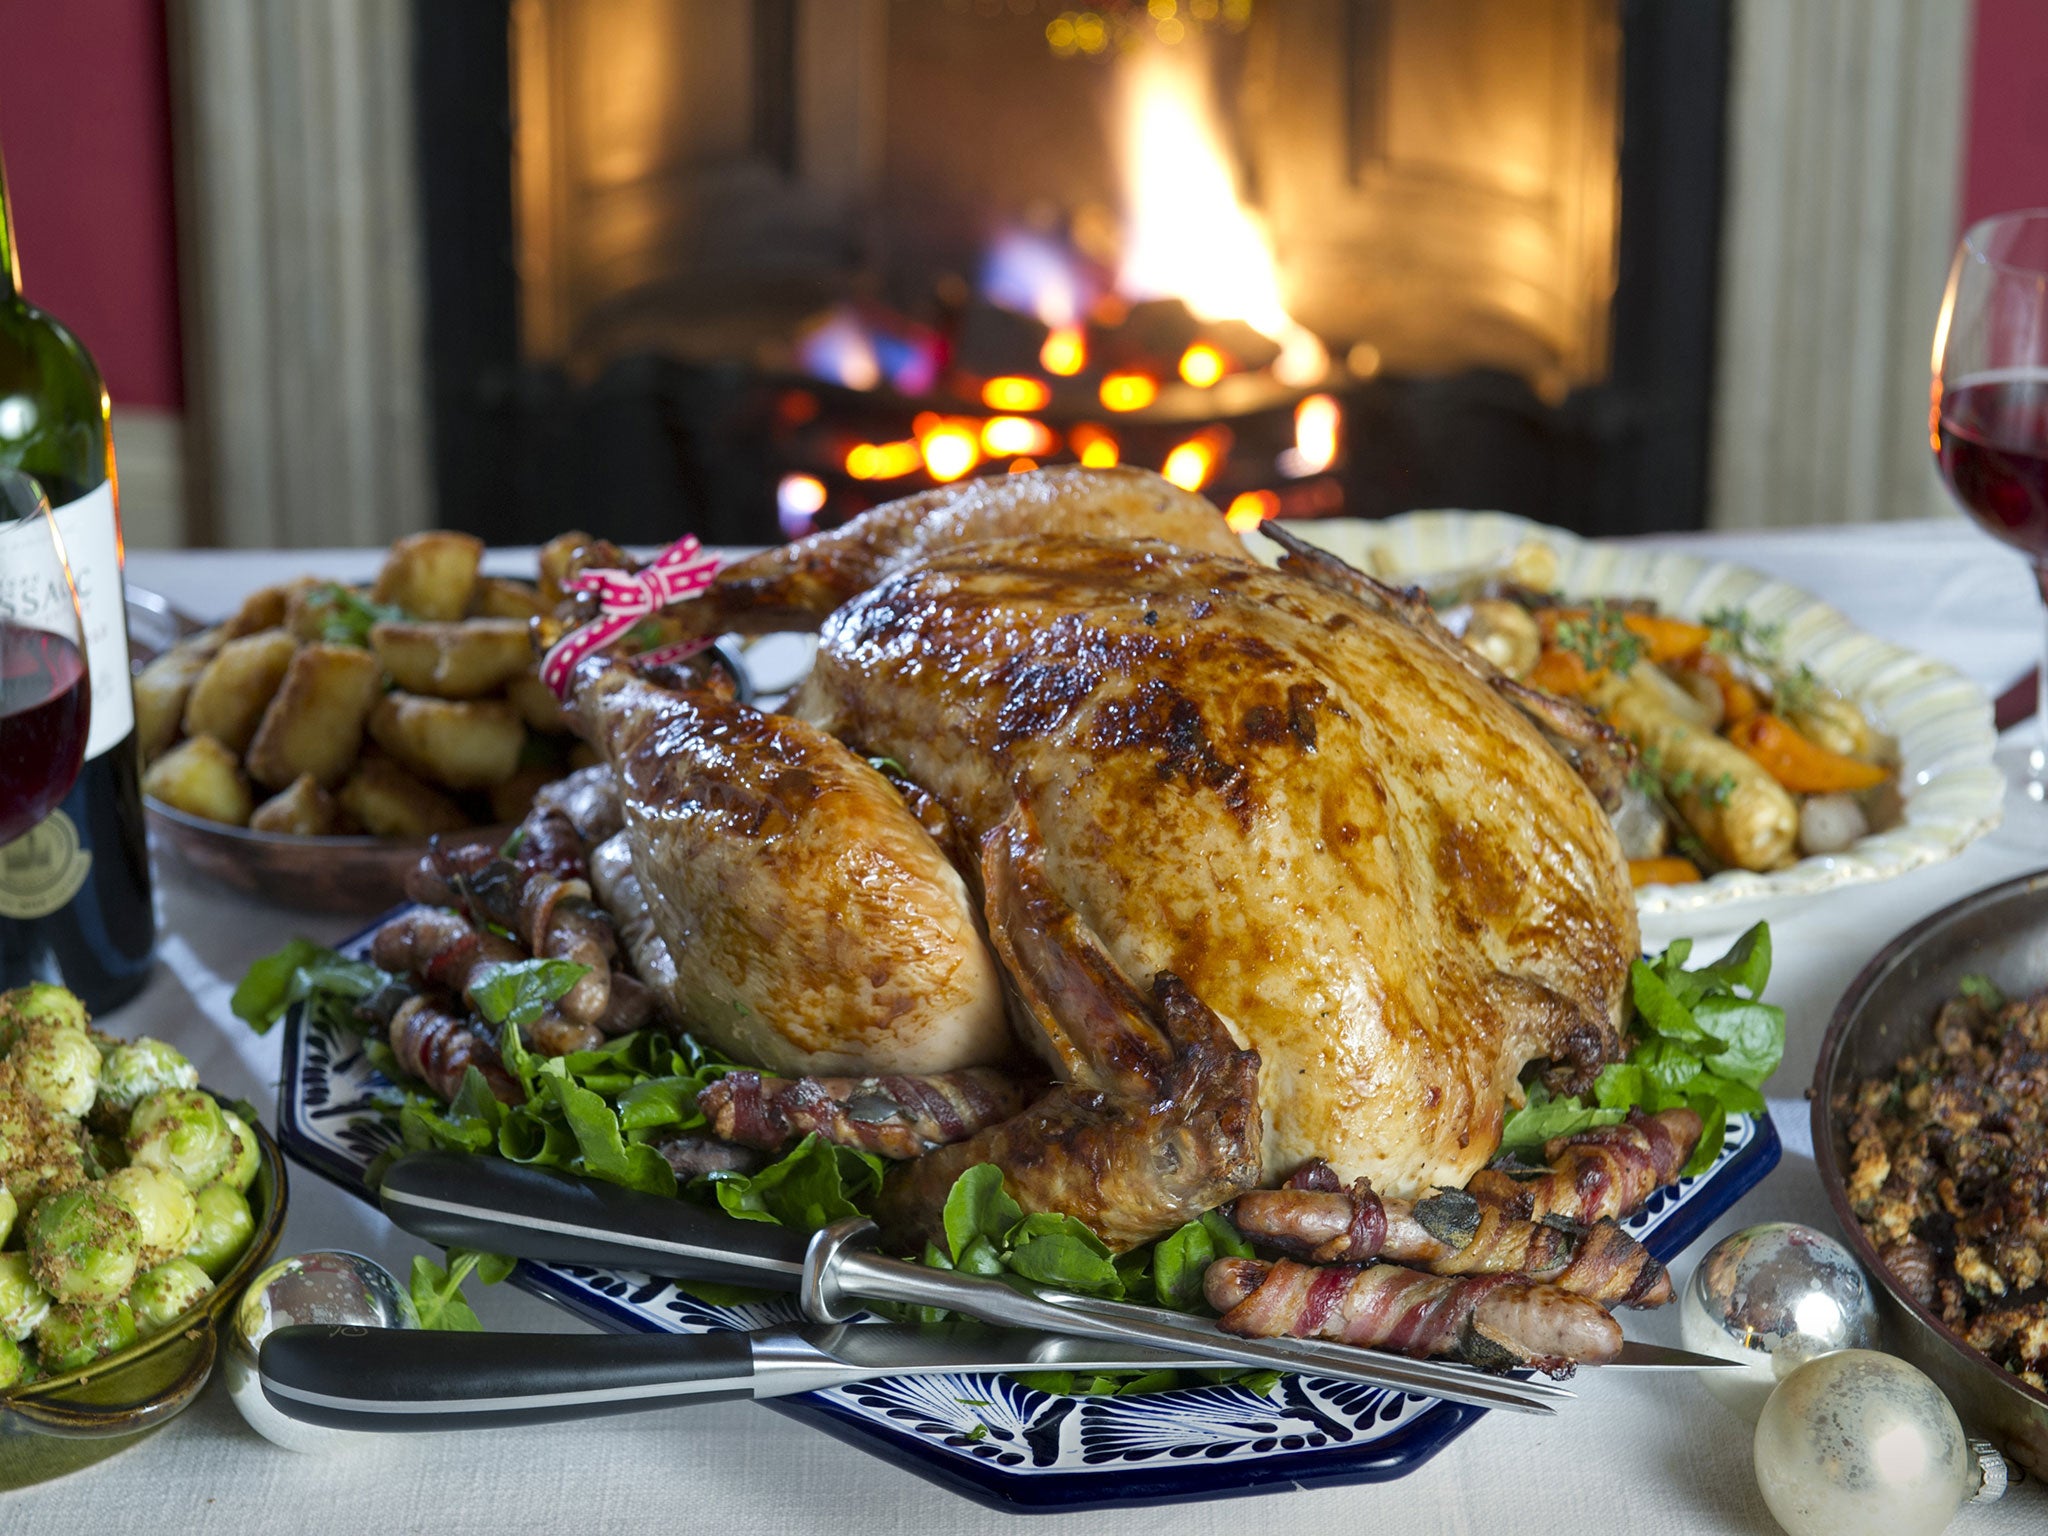 What Is The Most Popular Main Dish For Christmas Dinner?